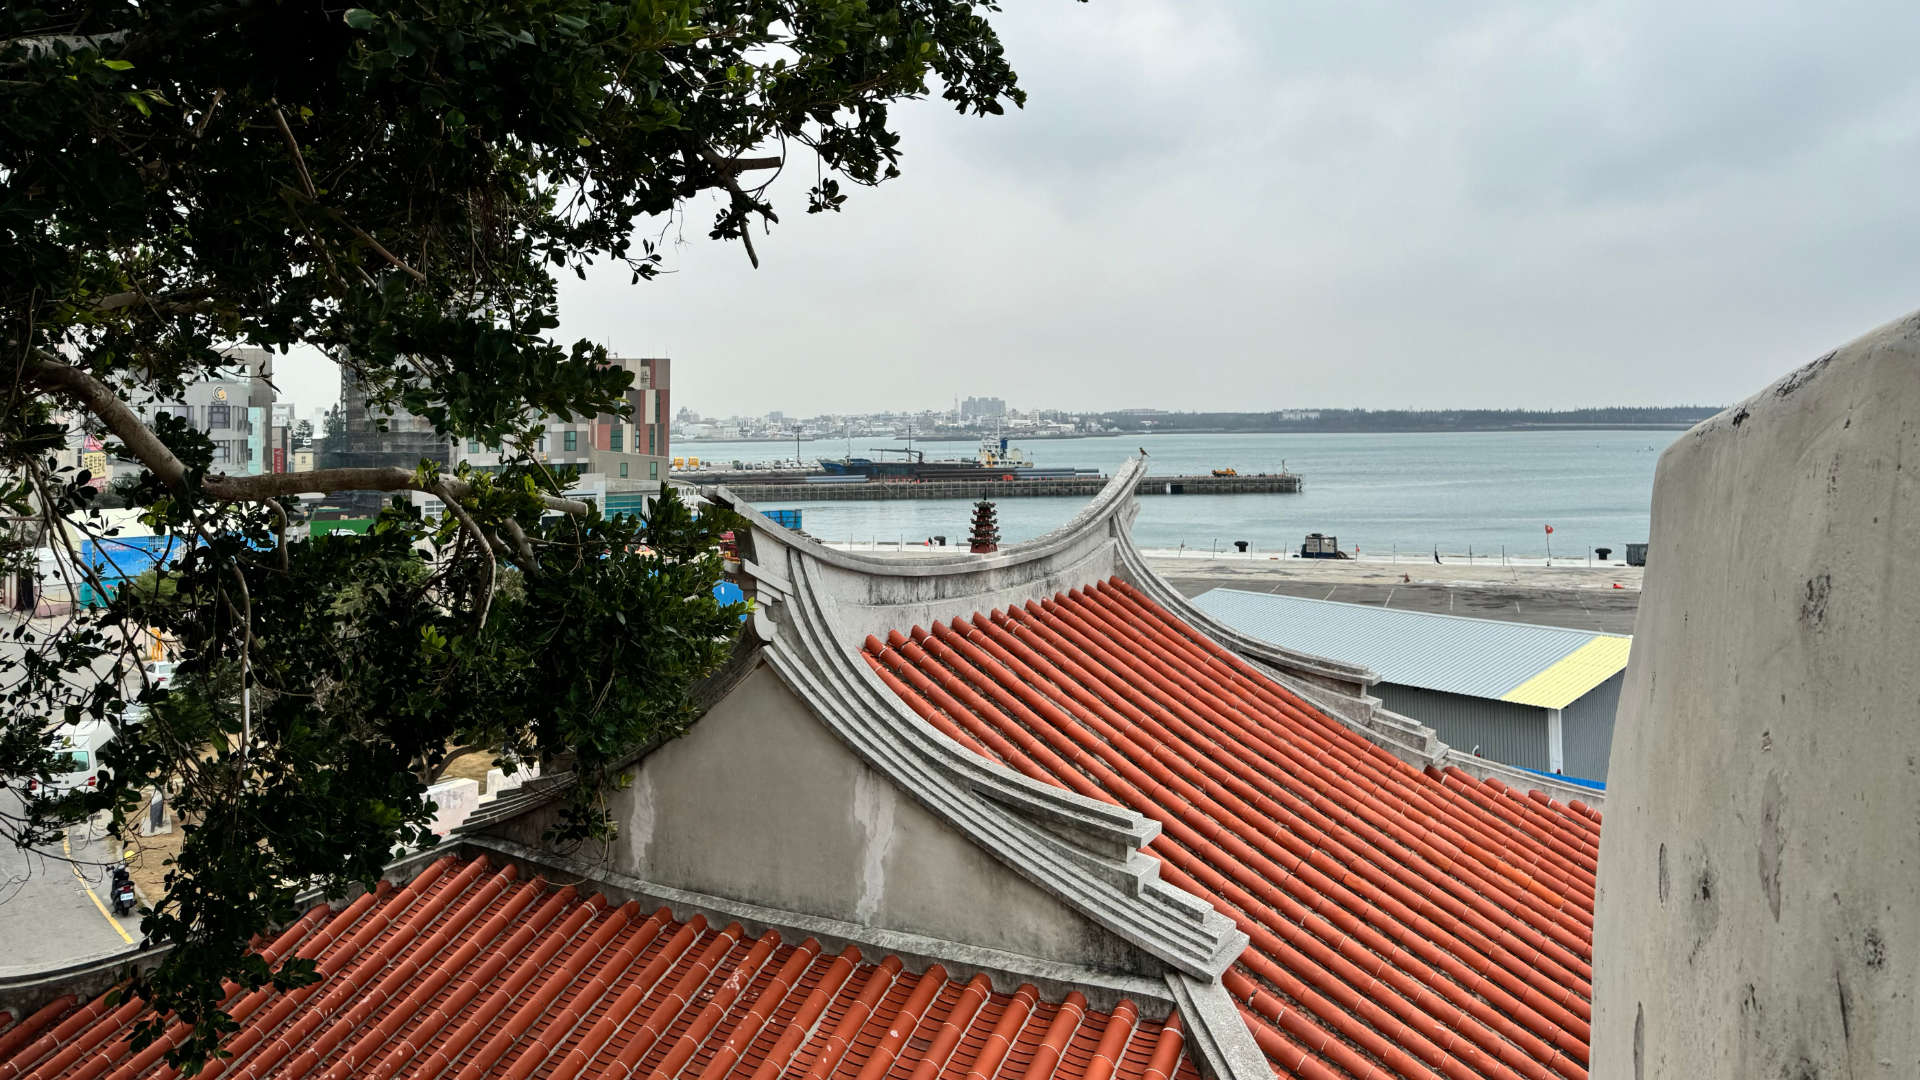 Magong Harbor from across a traditional tiled rooftop.